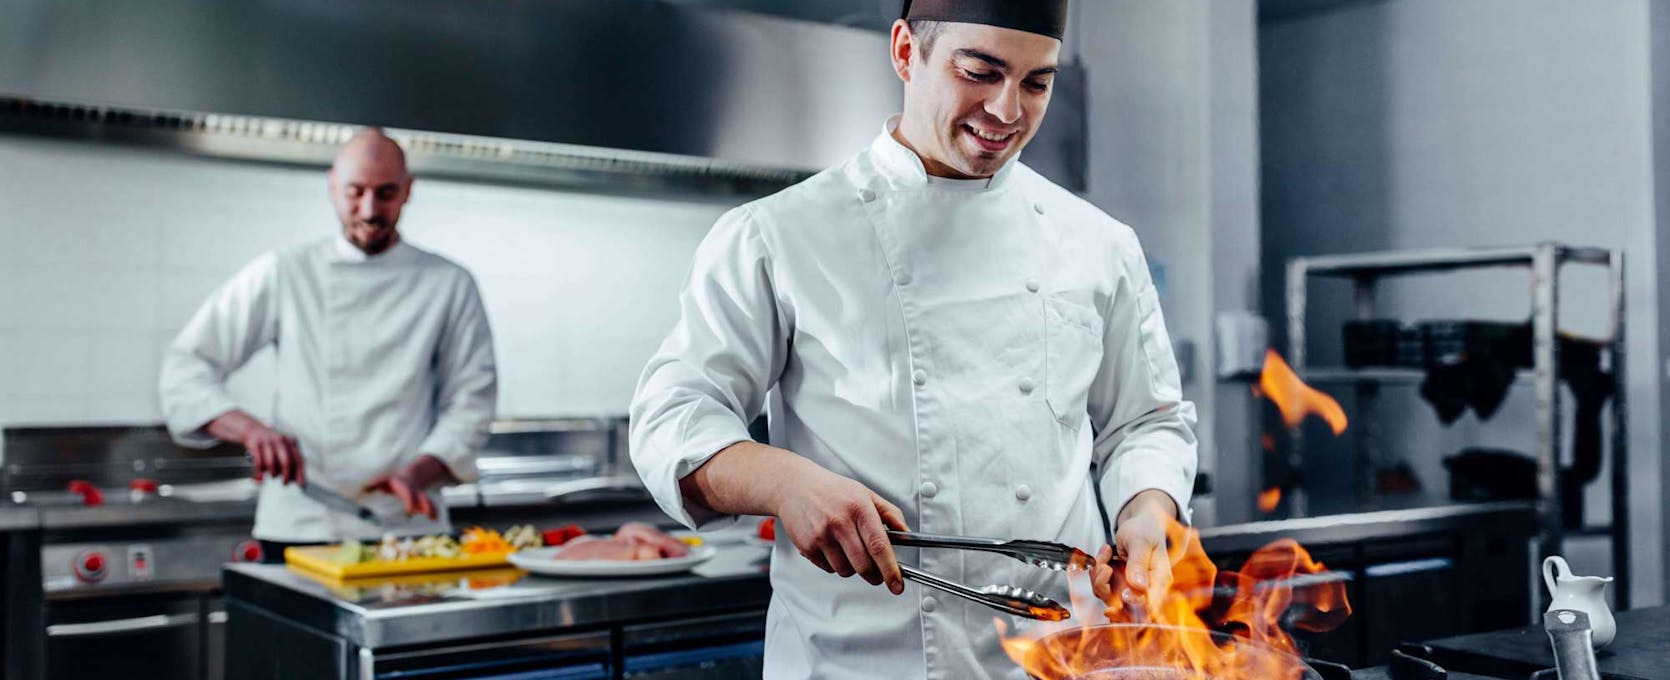 restaurant consulting | chefs prepare meals at a franchise restaurant